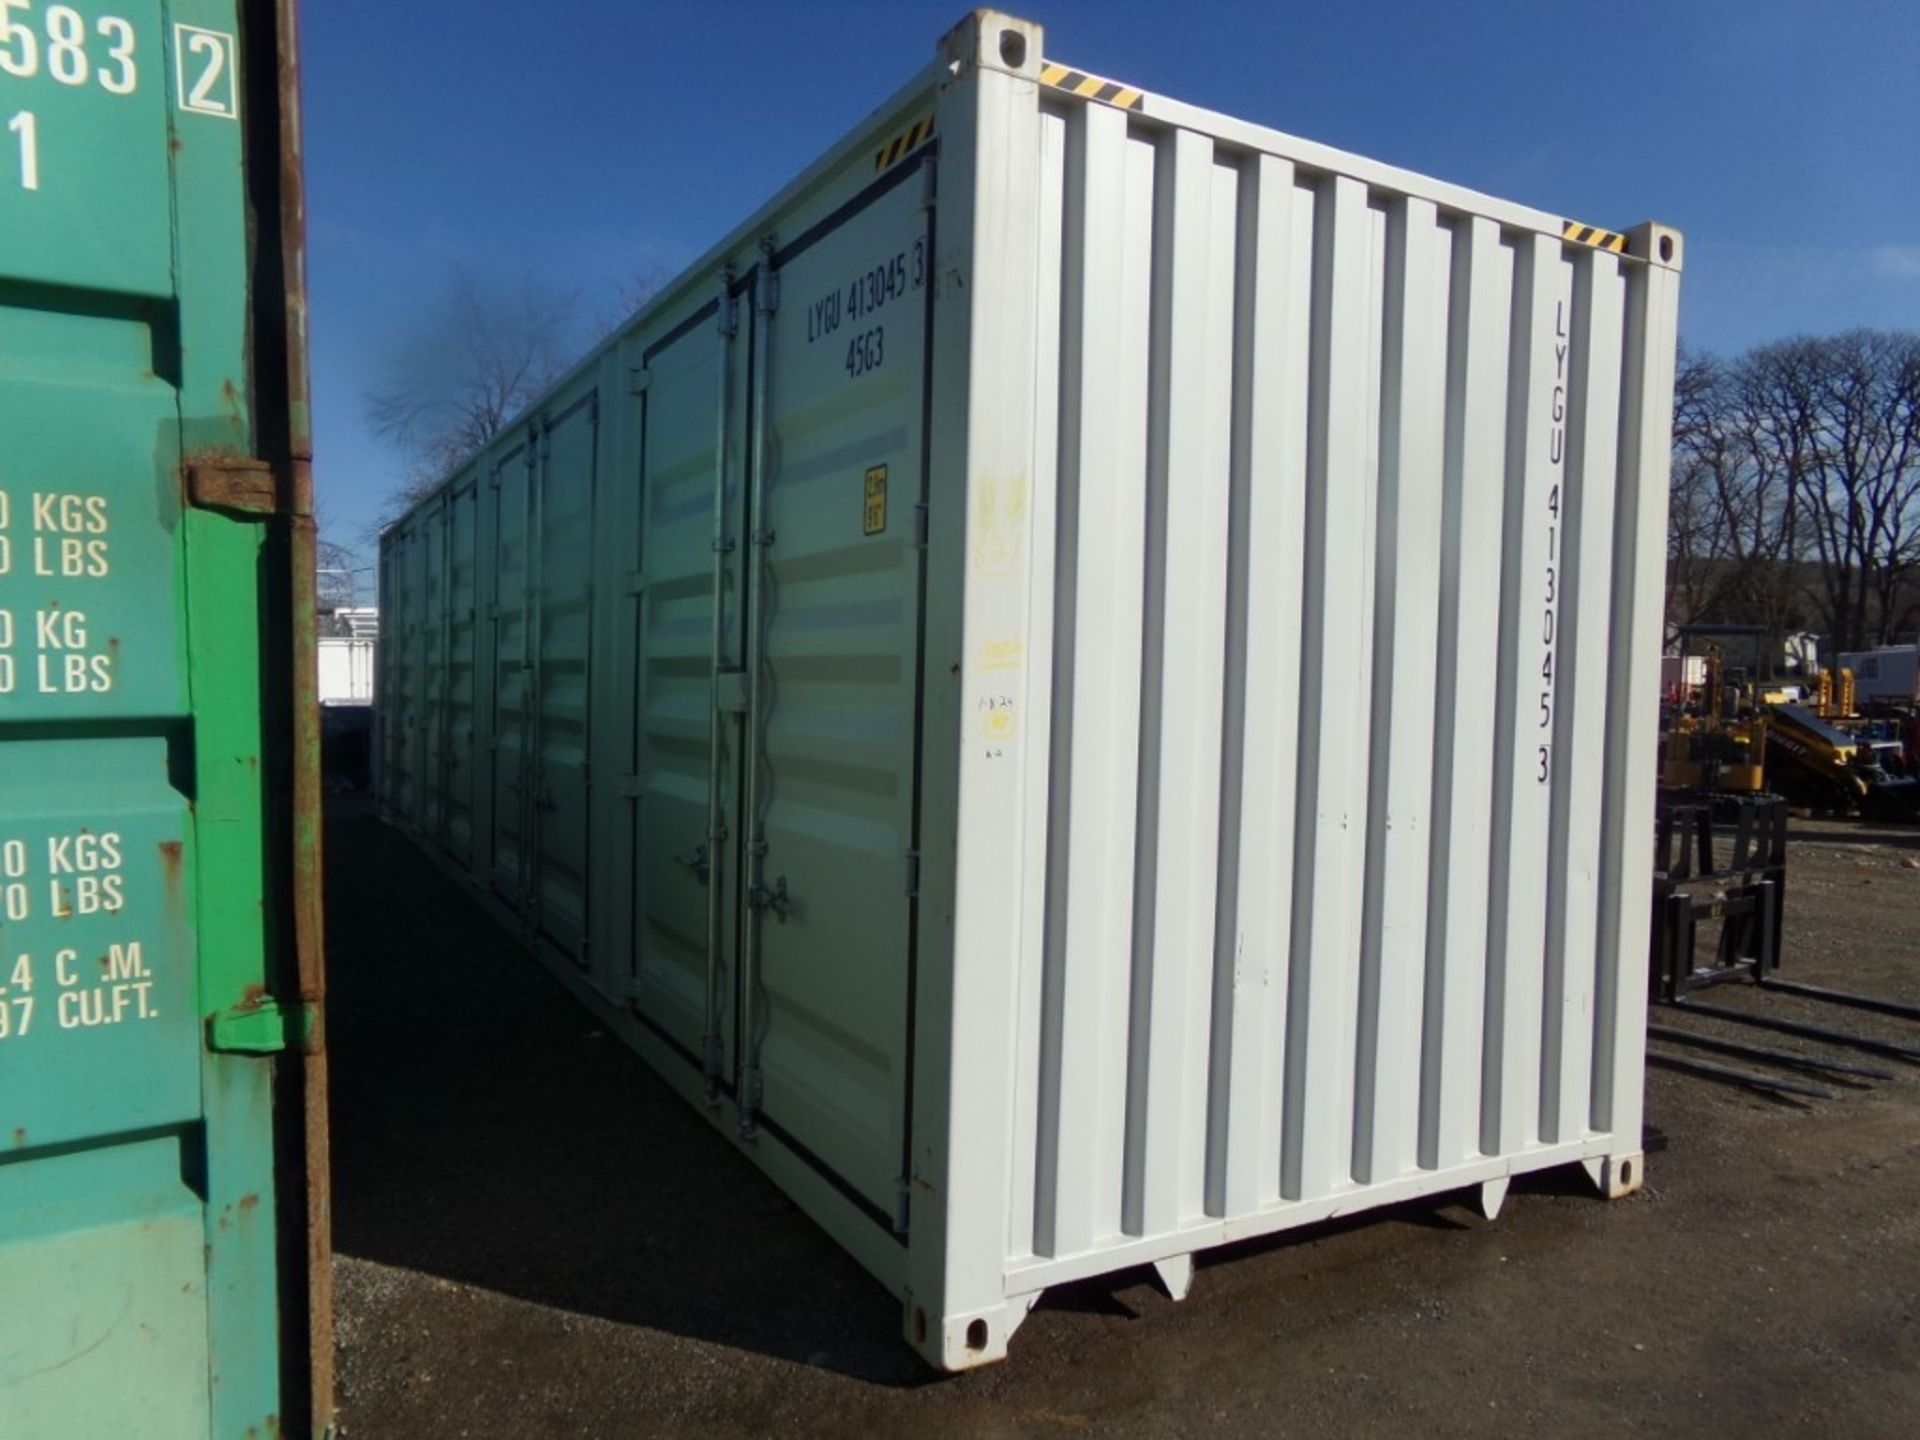 New 40' Storage Container 4 Side Access Doors, Barn Doors on 1 End, Cont#LYGU4130453